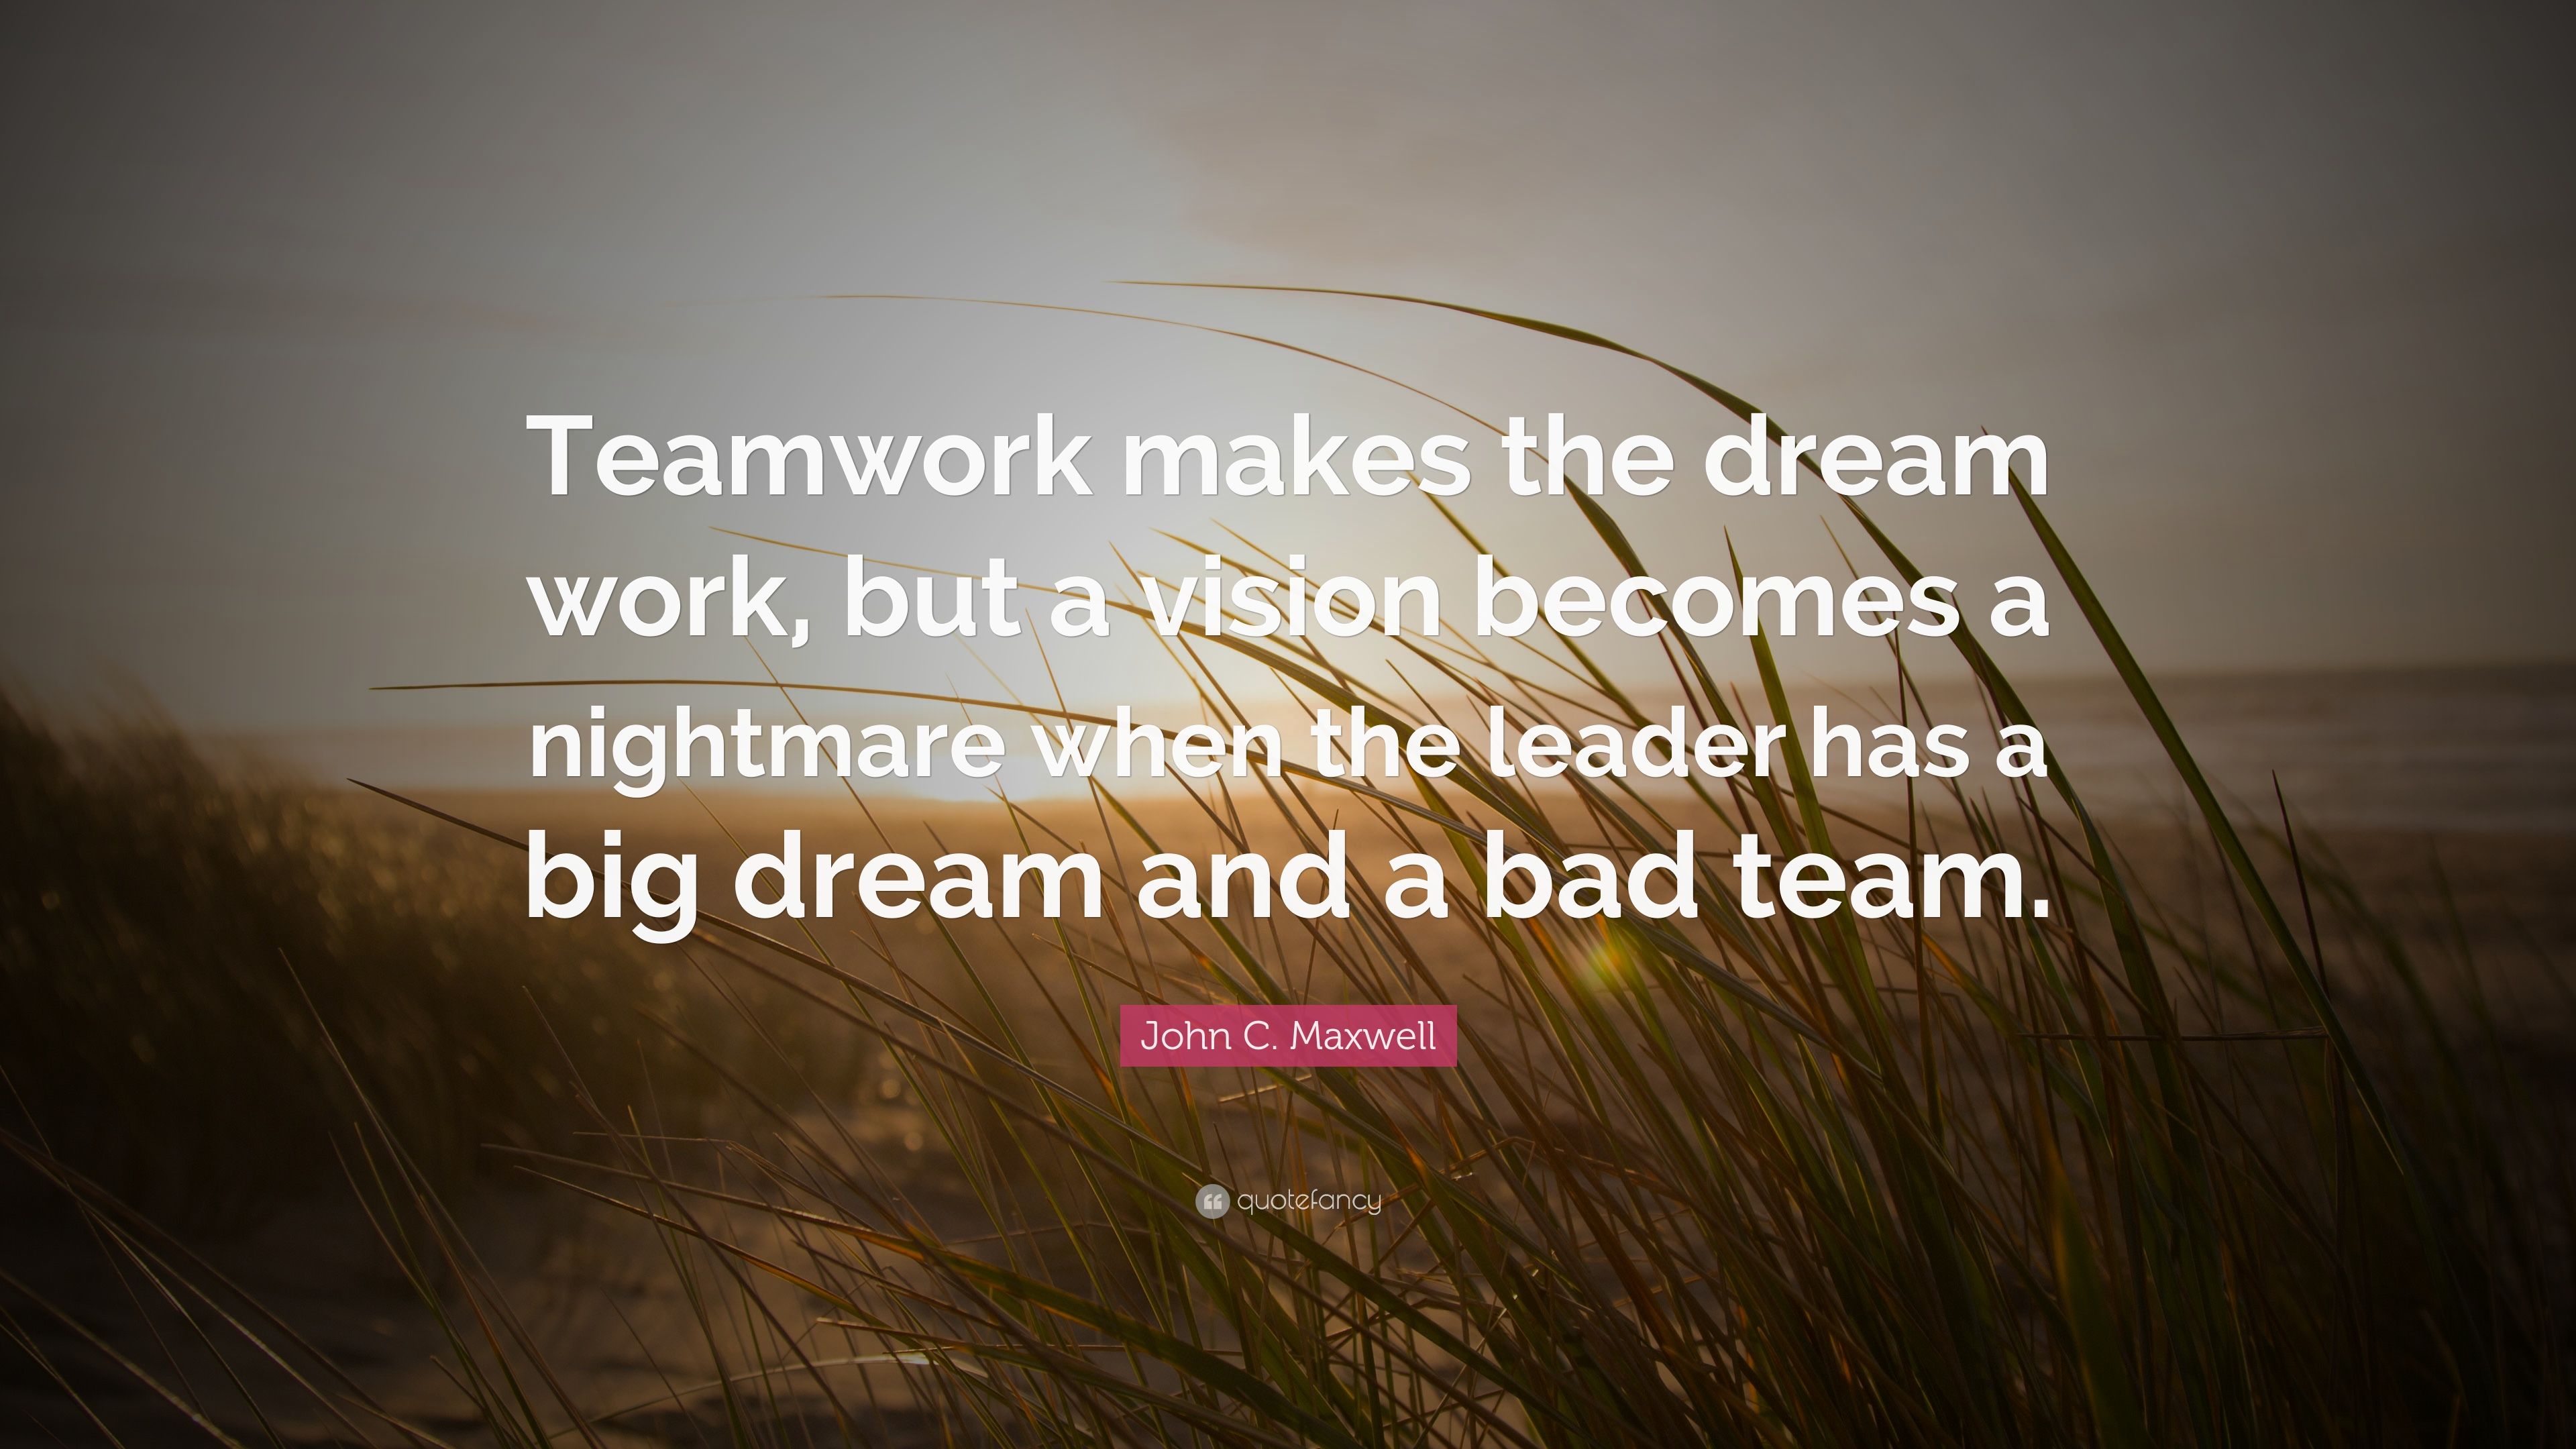 John C. Maxwell Quote: “Teamwork makes the dream work, but a vision becomes a nightmare when the leader has a big dream and a bad team.” (12 wallpaper)